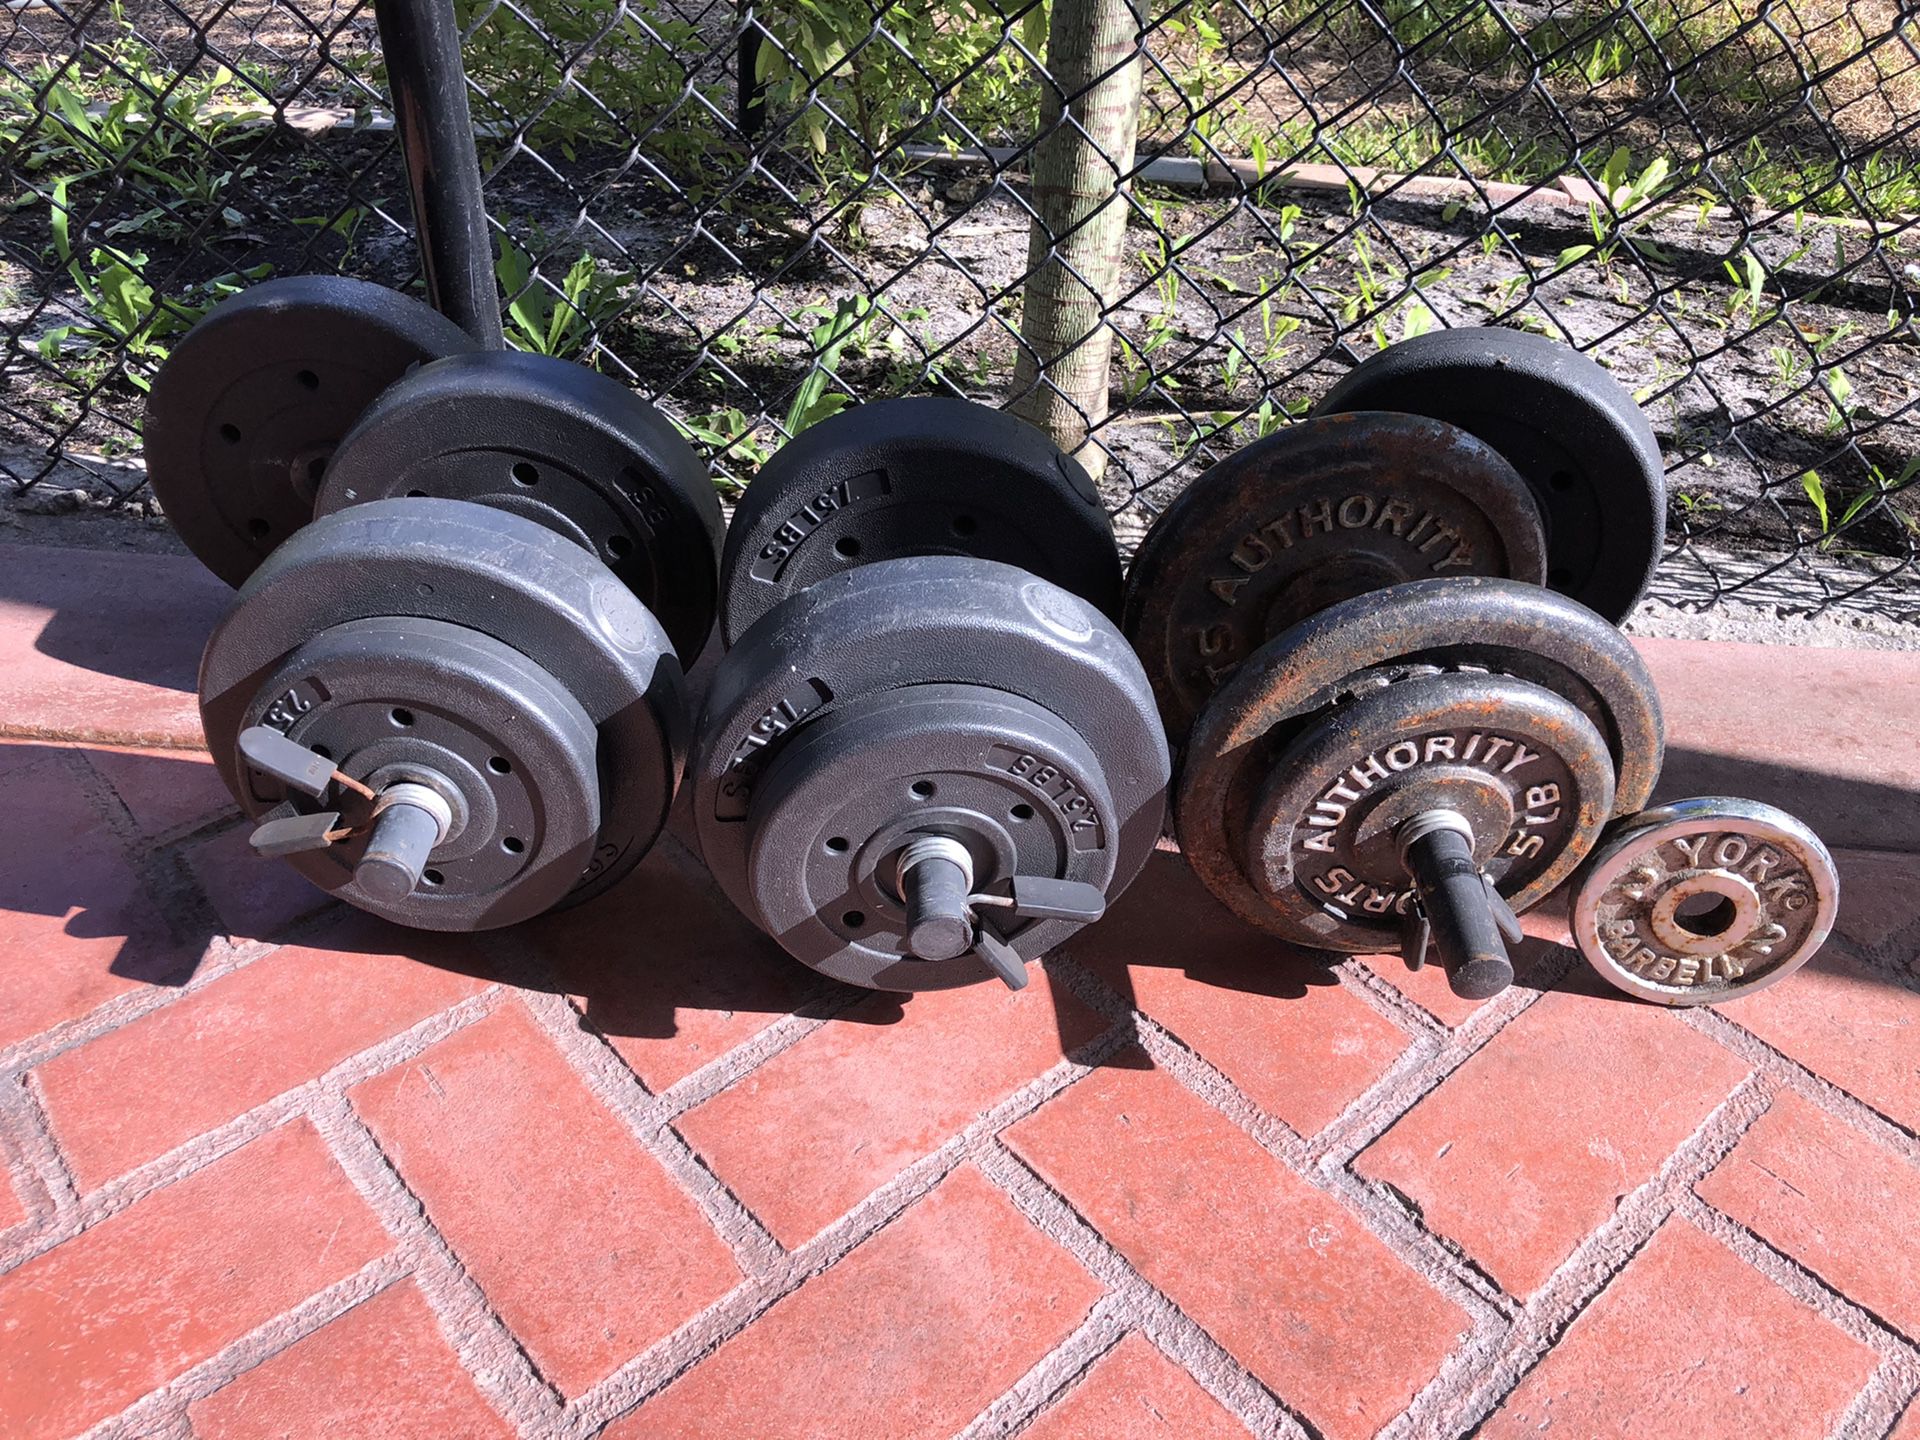 Dumbells and weights